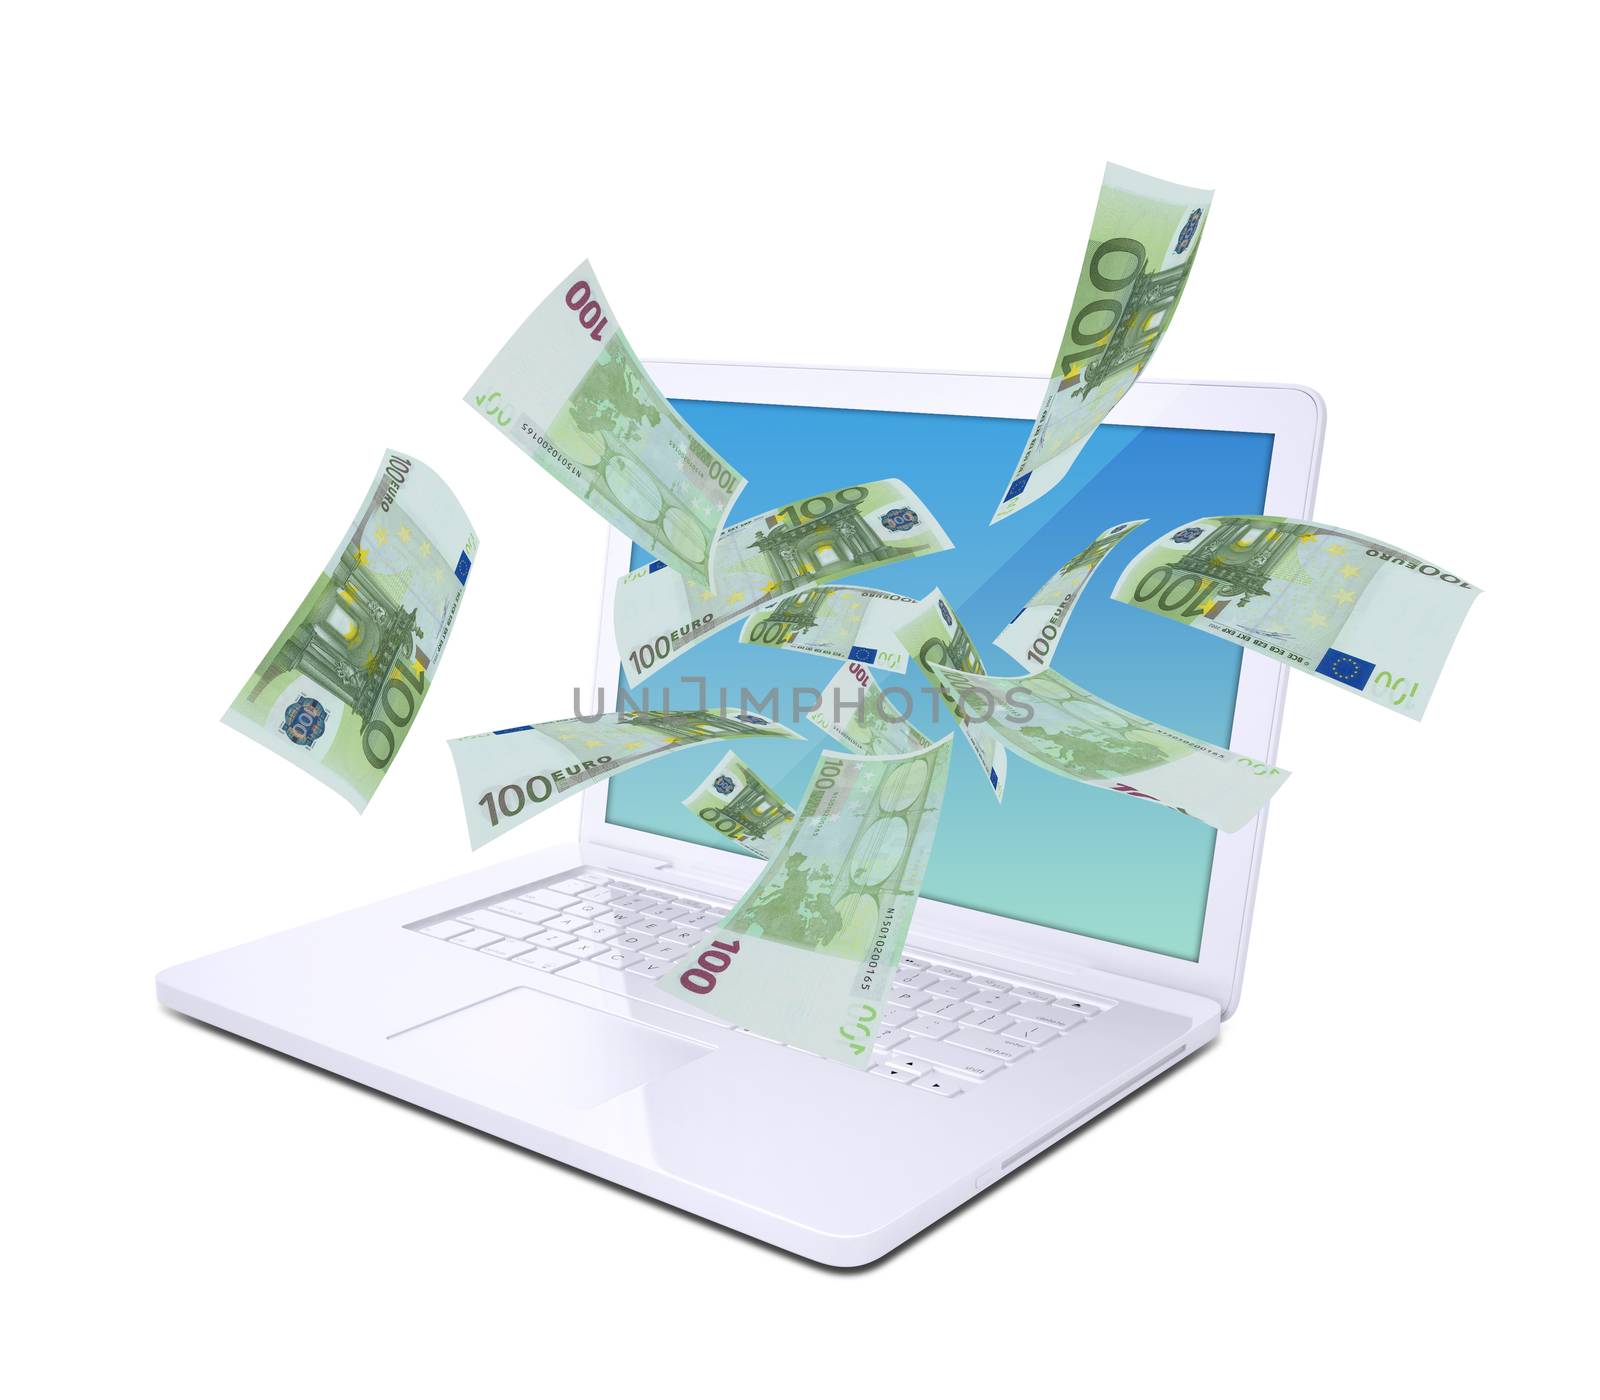 Euro notes flying around the laptop by cherezoff